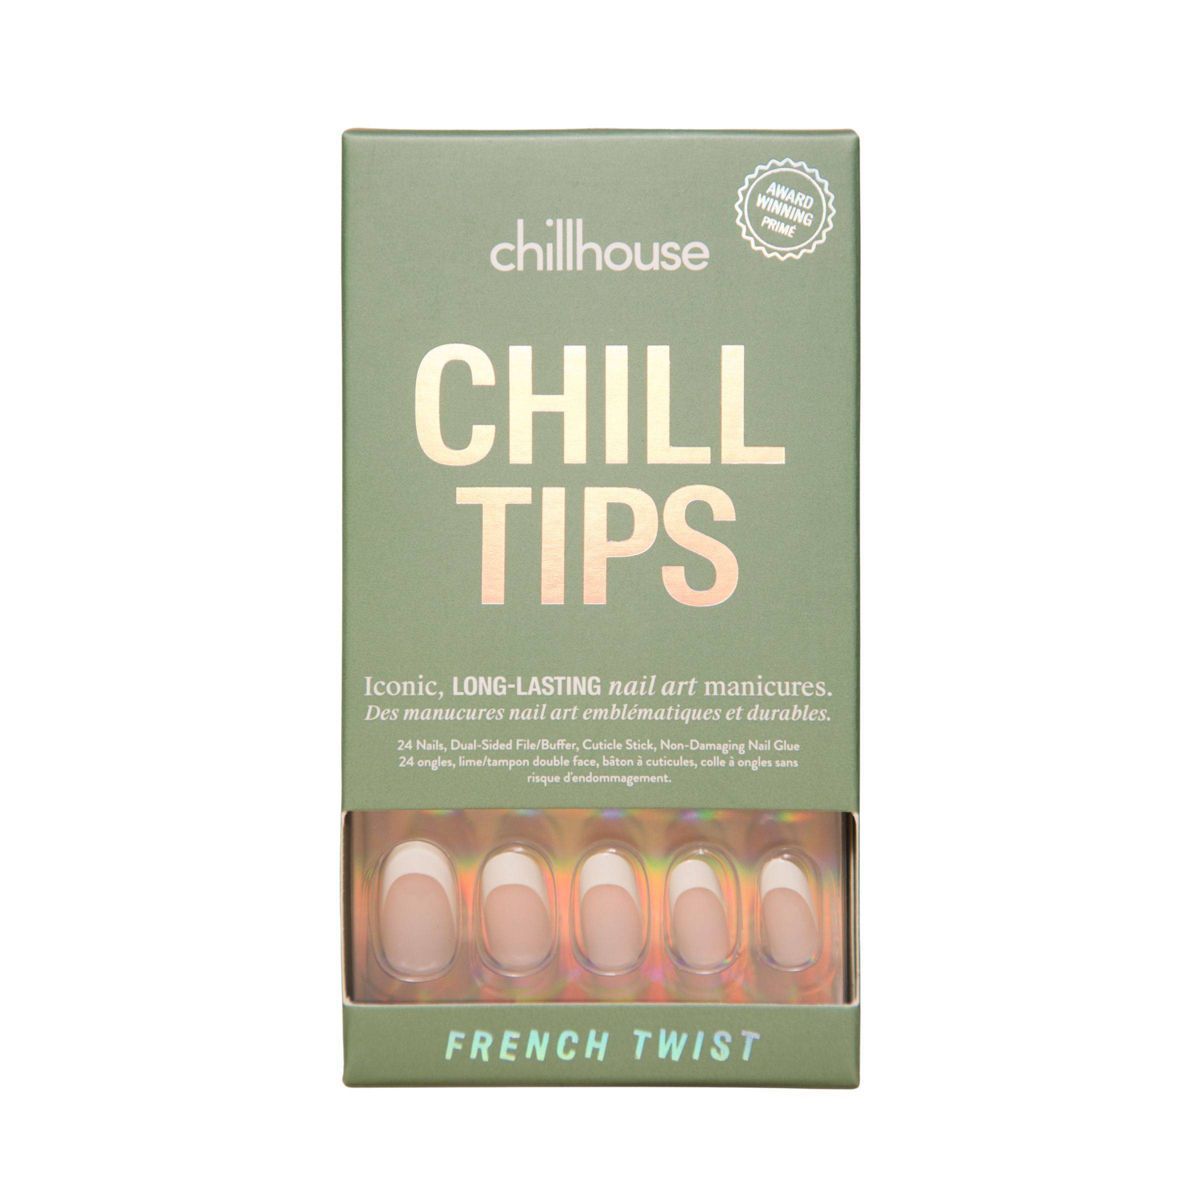 Chillhouse Chill Tips Nail Art Press On Fake Nails - French Twist - 24ct | Target